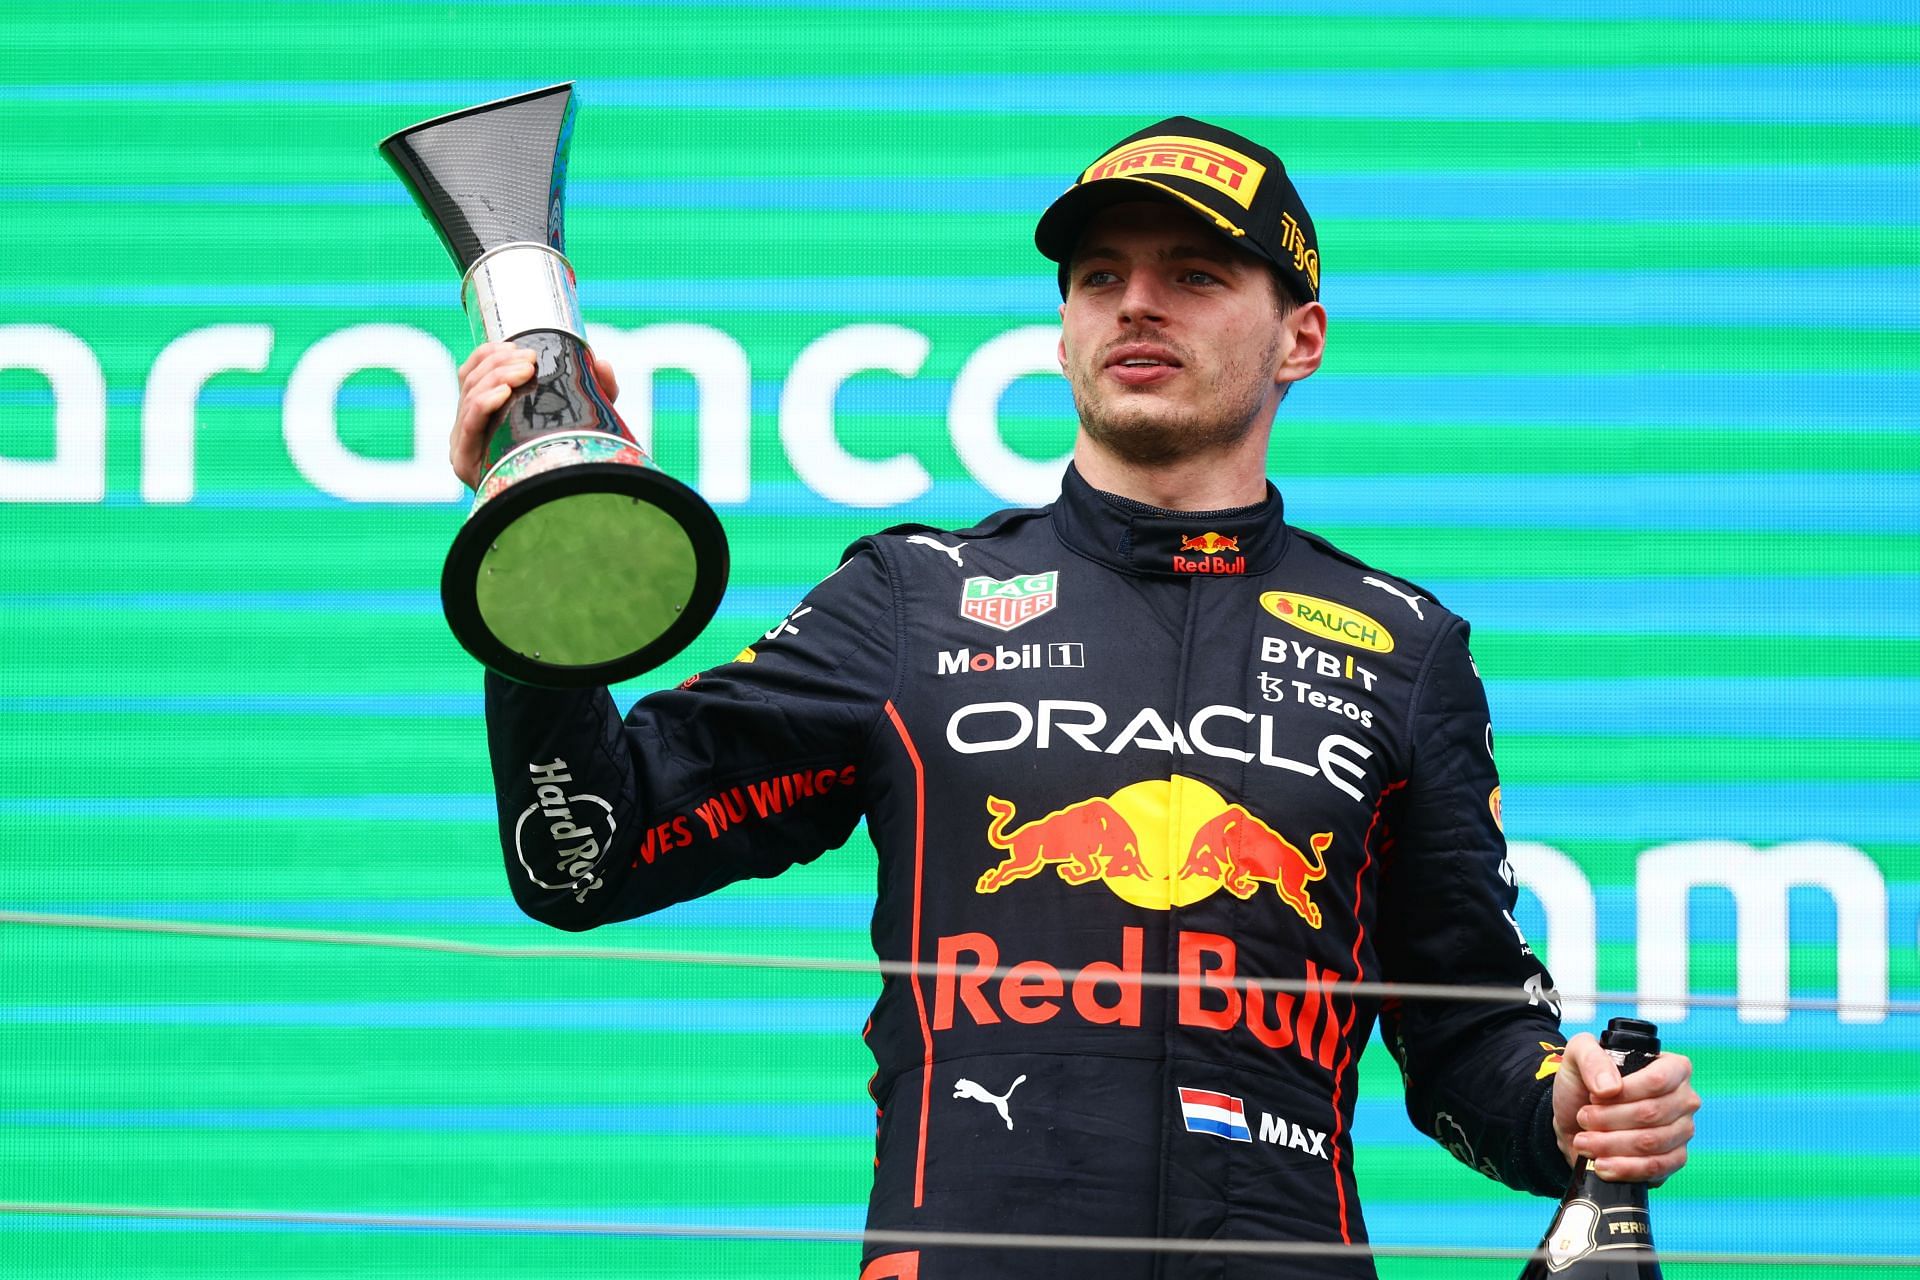 Red Bull driver Max Verstappen celebrates on the podium after winning the 2022 F1 Hungarian GP. (Photo by Francois Nel/Getty Images)